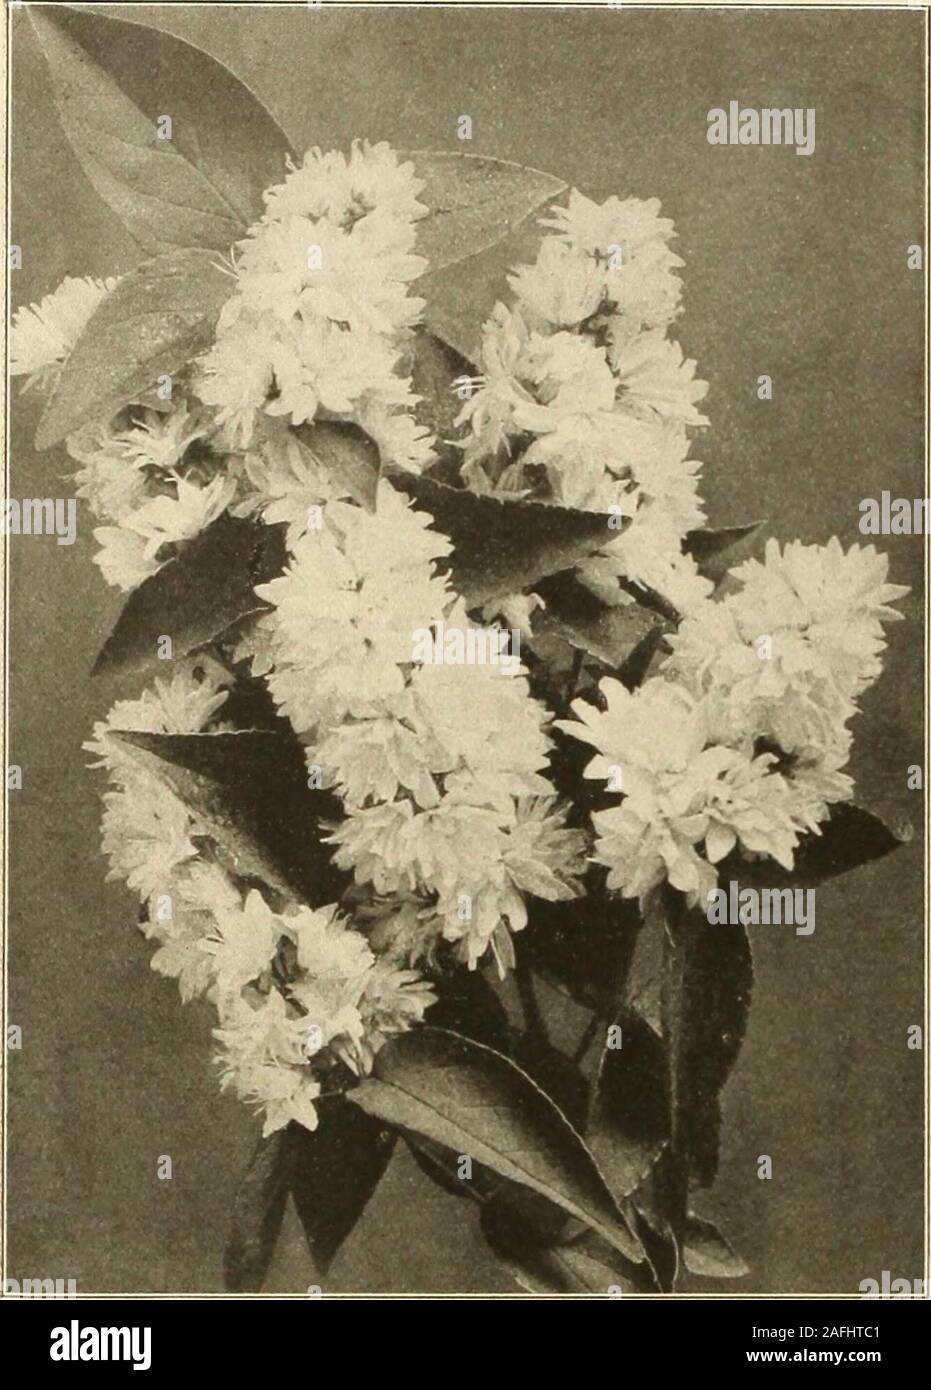 . Farquhar's autumn catalogue : 1913. ust Caragana arborescens. Siberian Pea. An interesting shrub, flowers yellow, pea-shaped; May ....Chionanthus virginicus. Fringe Tree. White; June.!Clethra alnifolia. Sueet Pepper Bush. White; in-. tensely fragrant; very fine .3^ Colutea arborescens. Bladder Senna. A handsome: and interesting shrub; its bright yellow flowers and! large transparent seed pods appearing throughout the summer 1-5 Corchorus, or Kerria Japonicus flore pleno. Aver&gt;I graceful dwarf shrub with fe;ither bright greenj foliage, flowers double, orange yellow; June and Julyj .35Japo Stock Photo